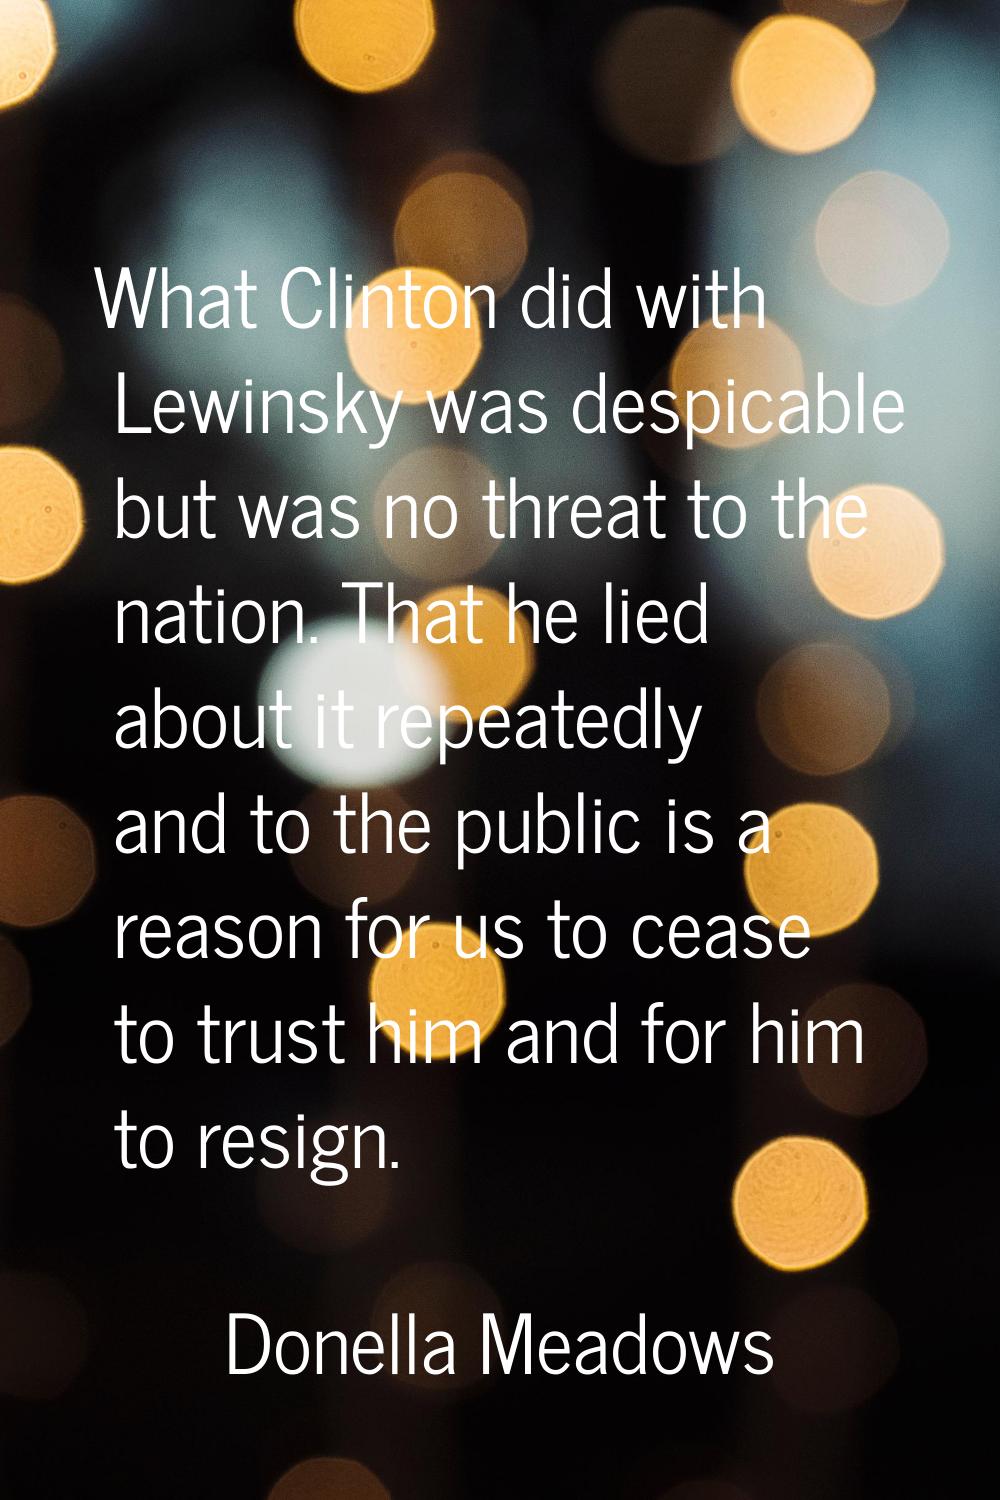 What Clinton did with Lewinsky was despicable but was no threat to the nation. That he lied about i